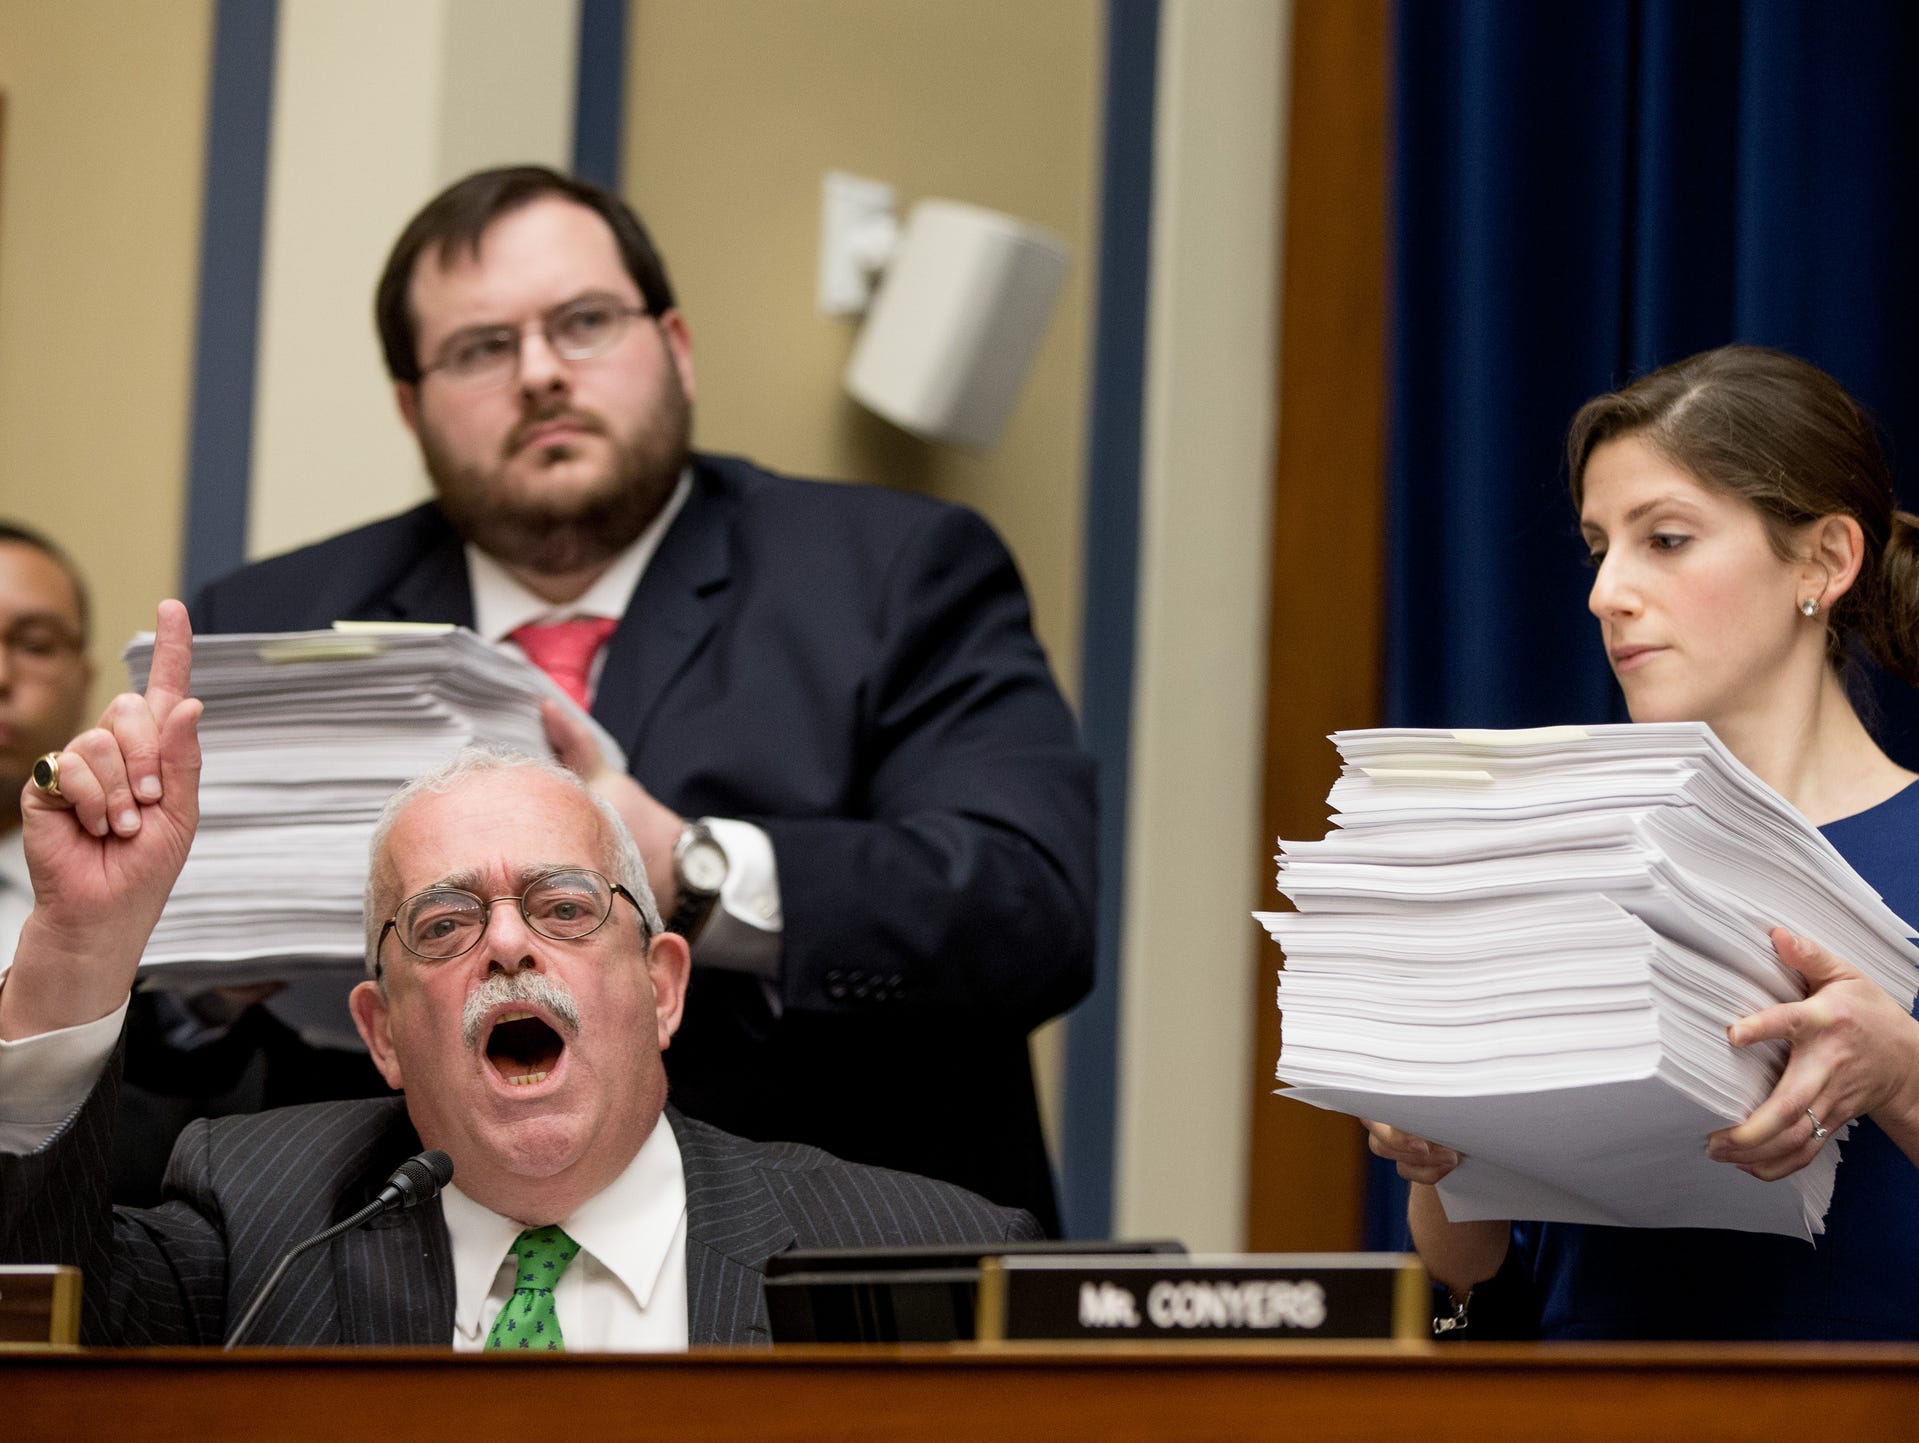 Staff members hold up stacks of emergency manager edicts